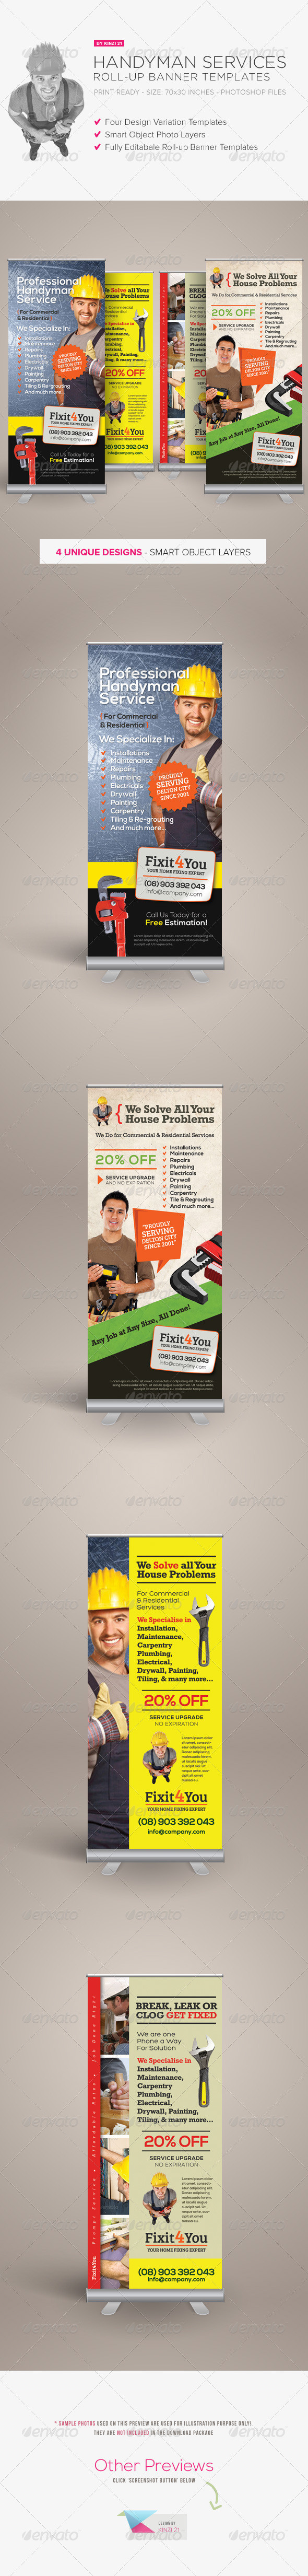 Graphic river handyman services roll up banners kinzi21